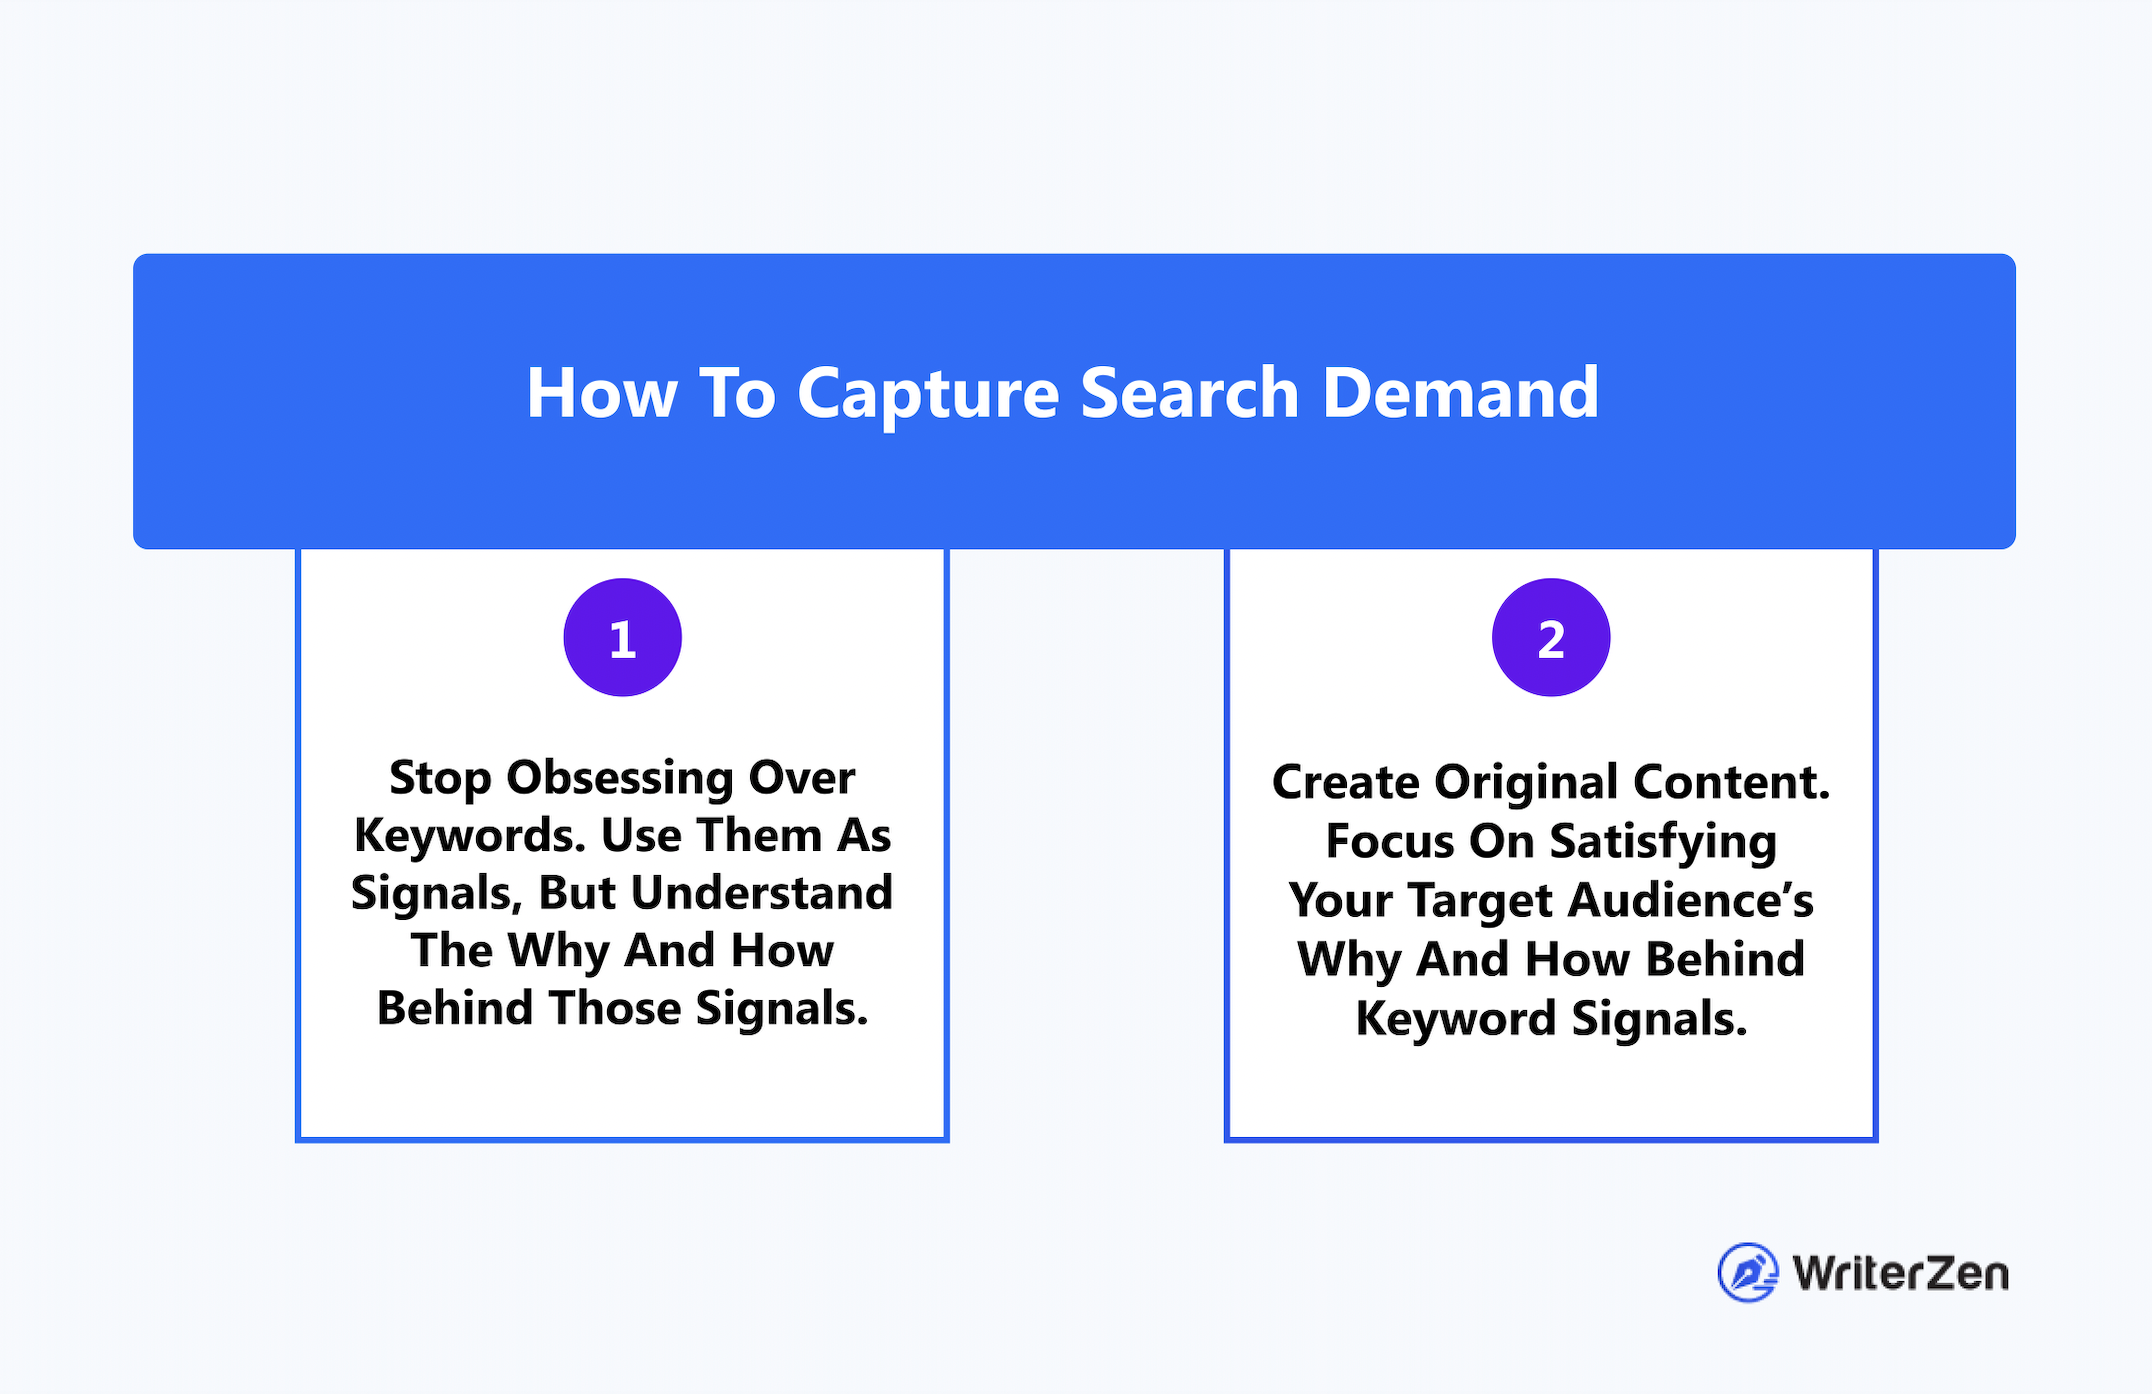 How To Capture Search Demand